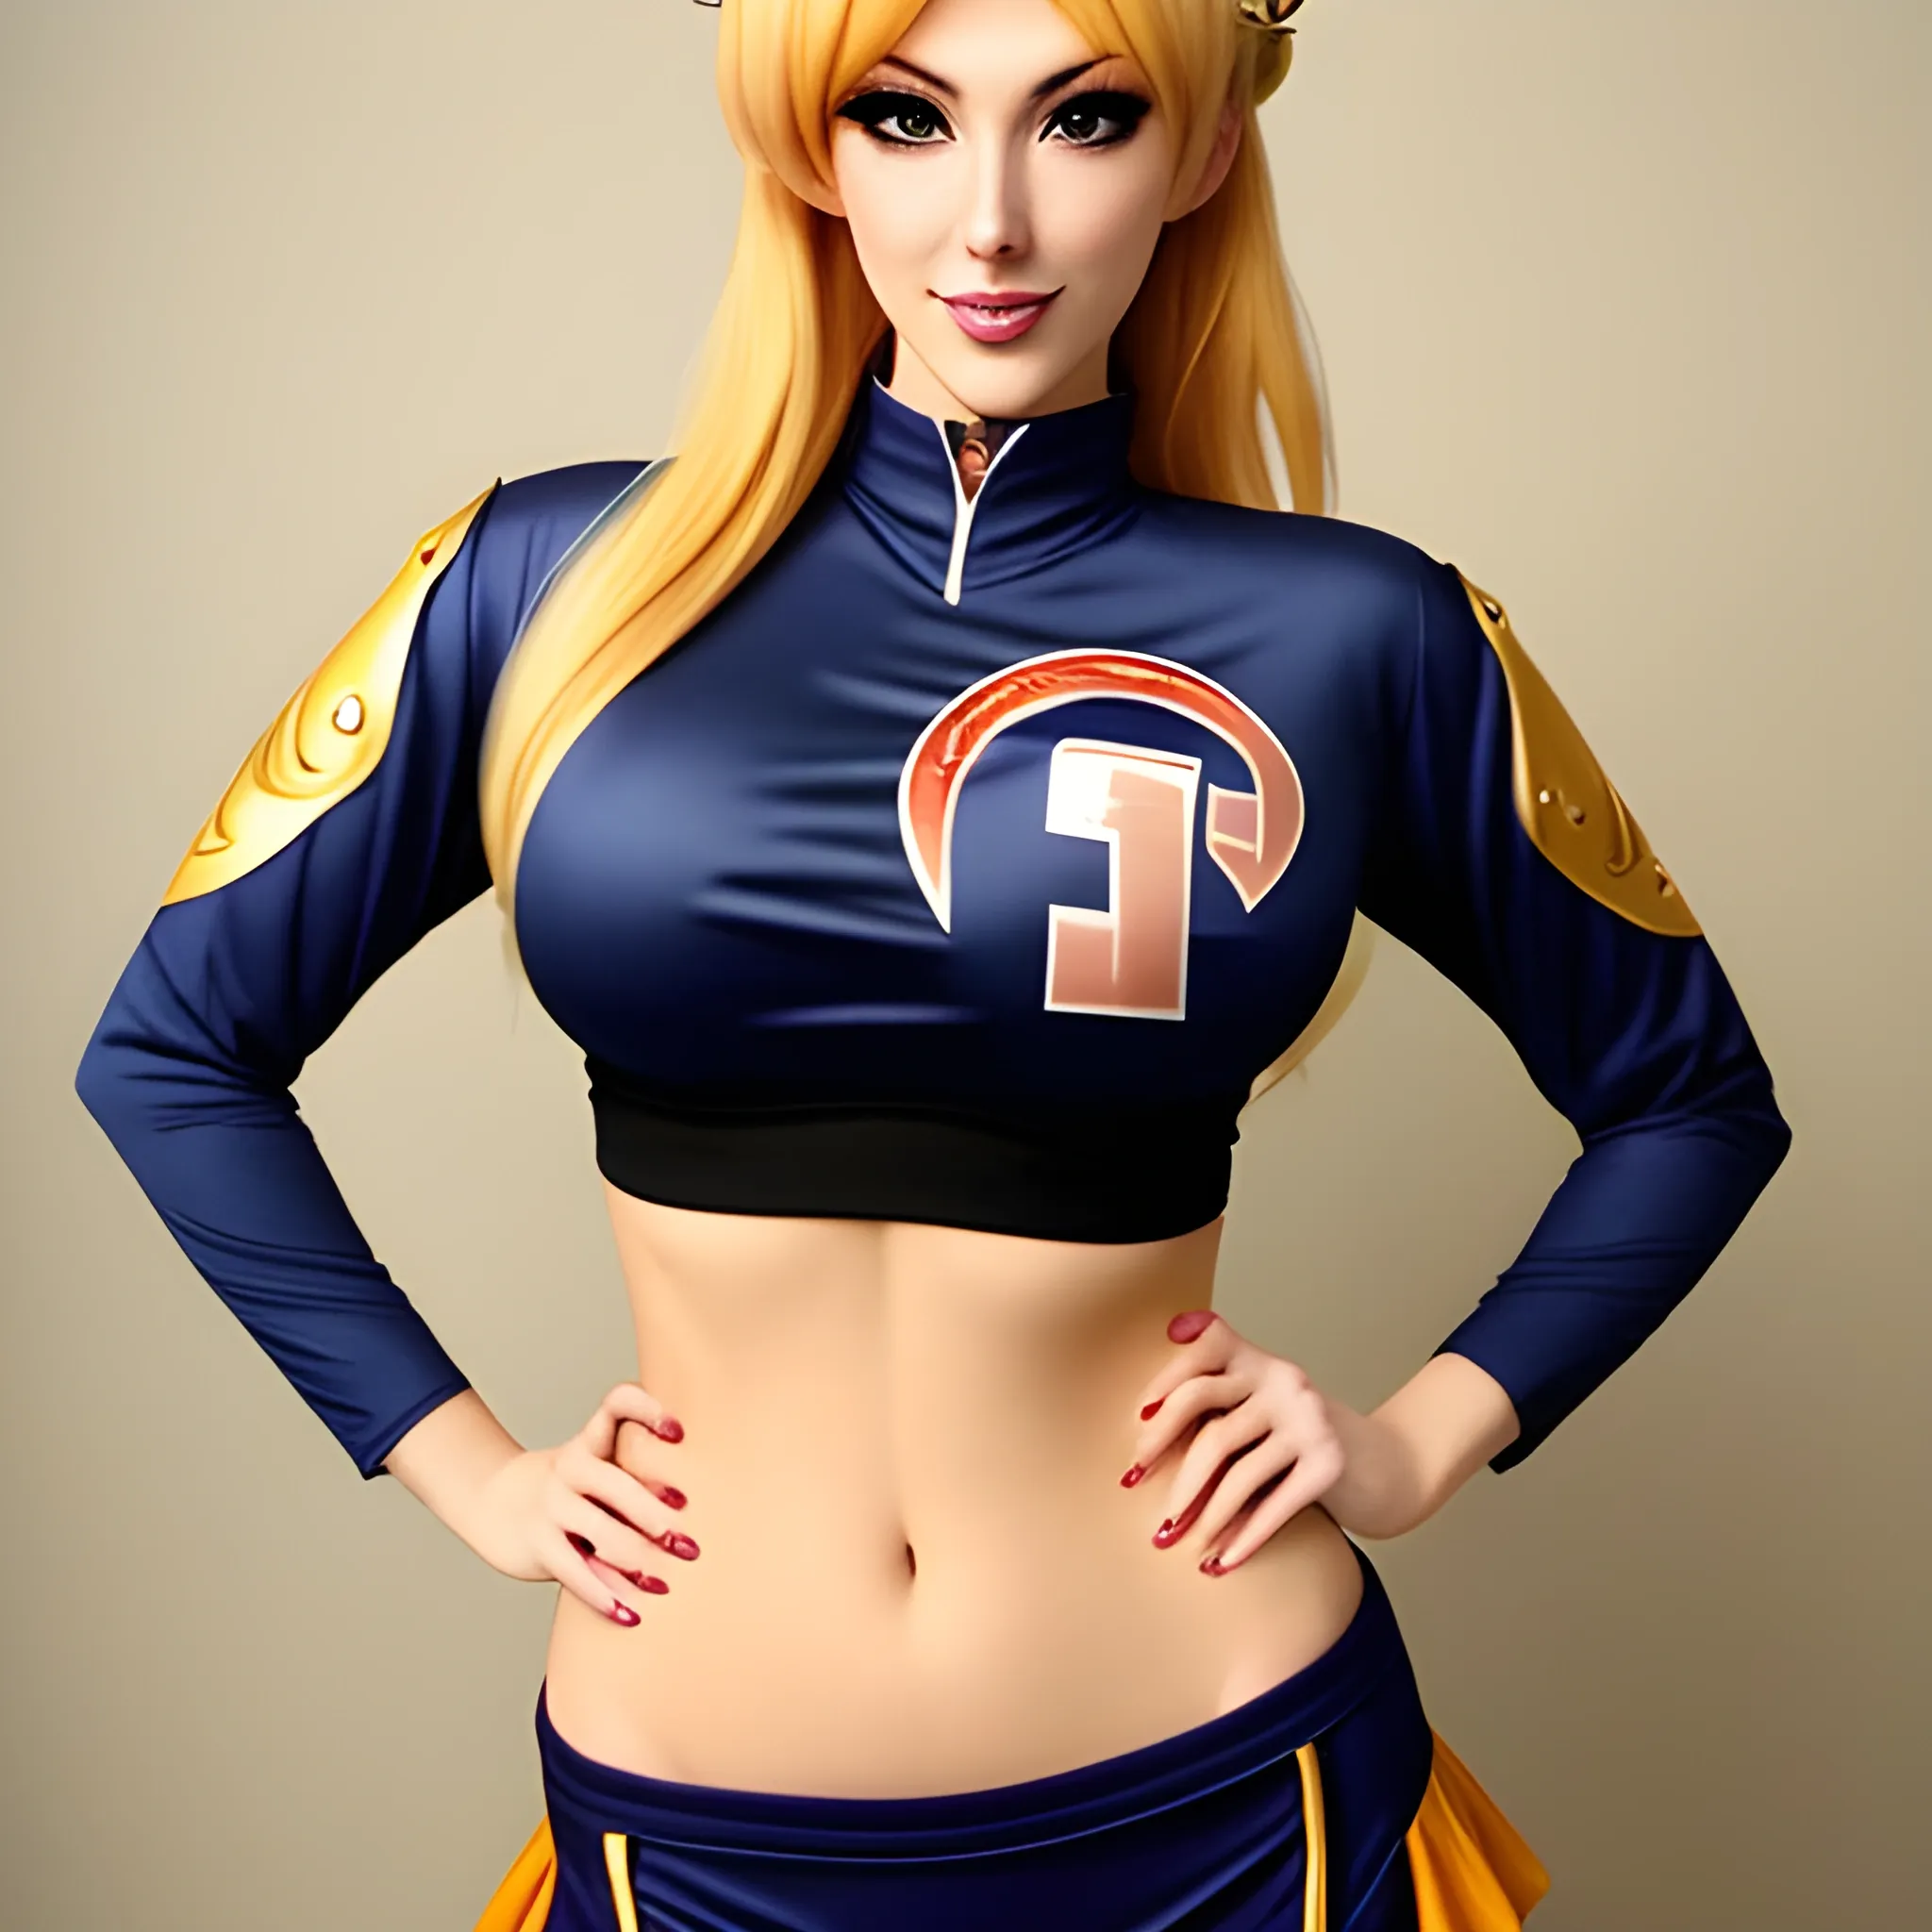 Attractive, cute, sexy anime style Princess peach blonde girl with a crown and an american football in a navy blue busch light beer jersey. The image should be sexy and have a Playboy feel to it